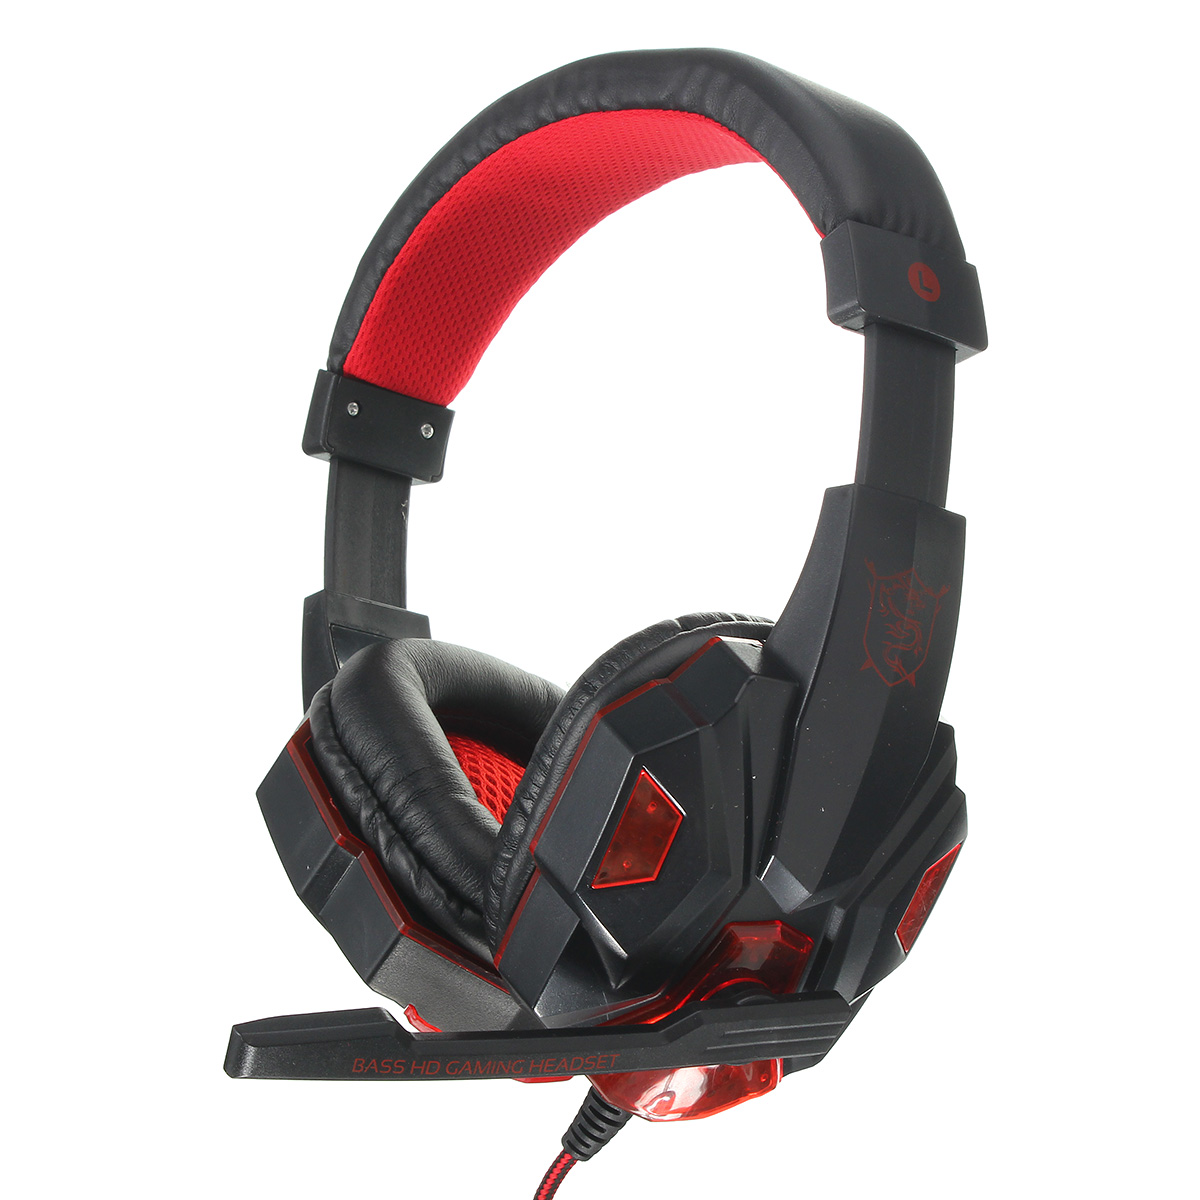 USB 3.5mm LED Surround Stereo Gaming Headset Headbrand Headphone With Mic 11